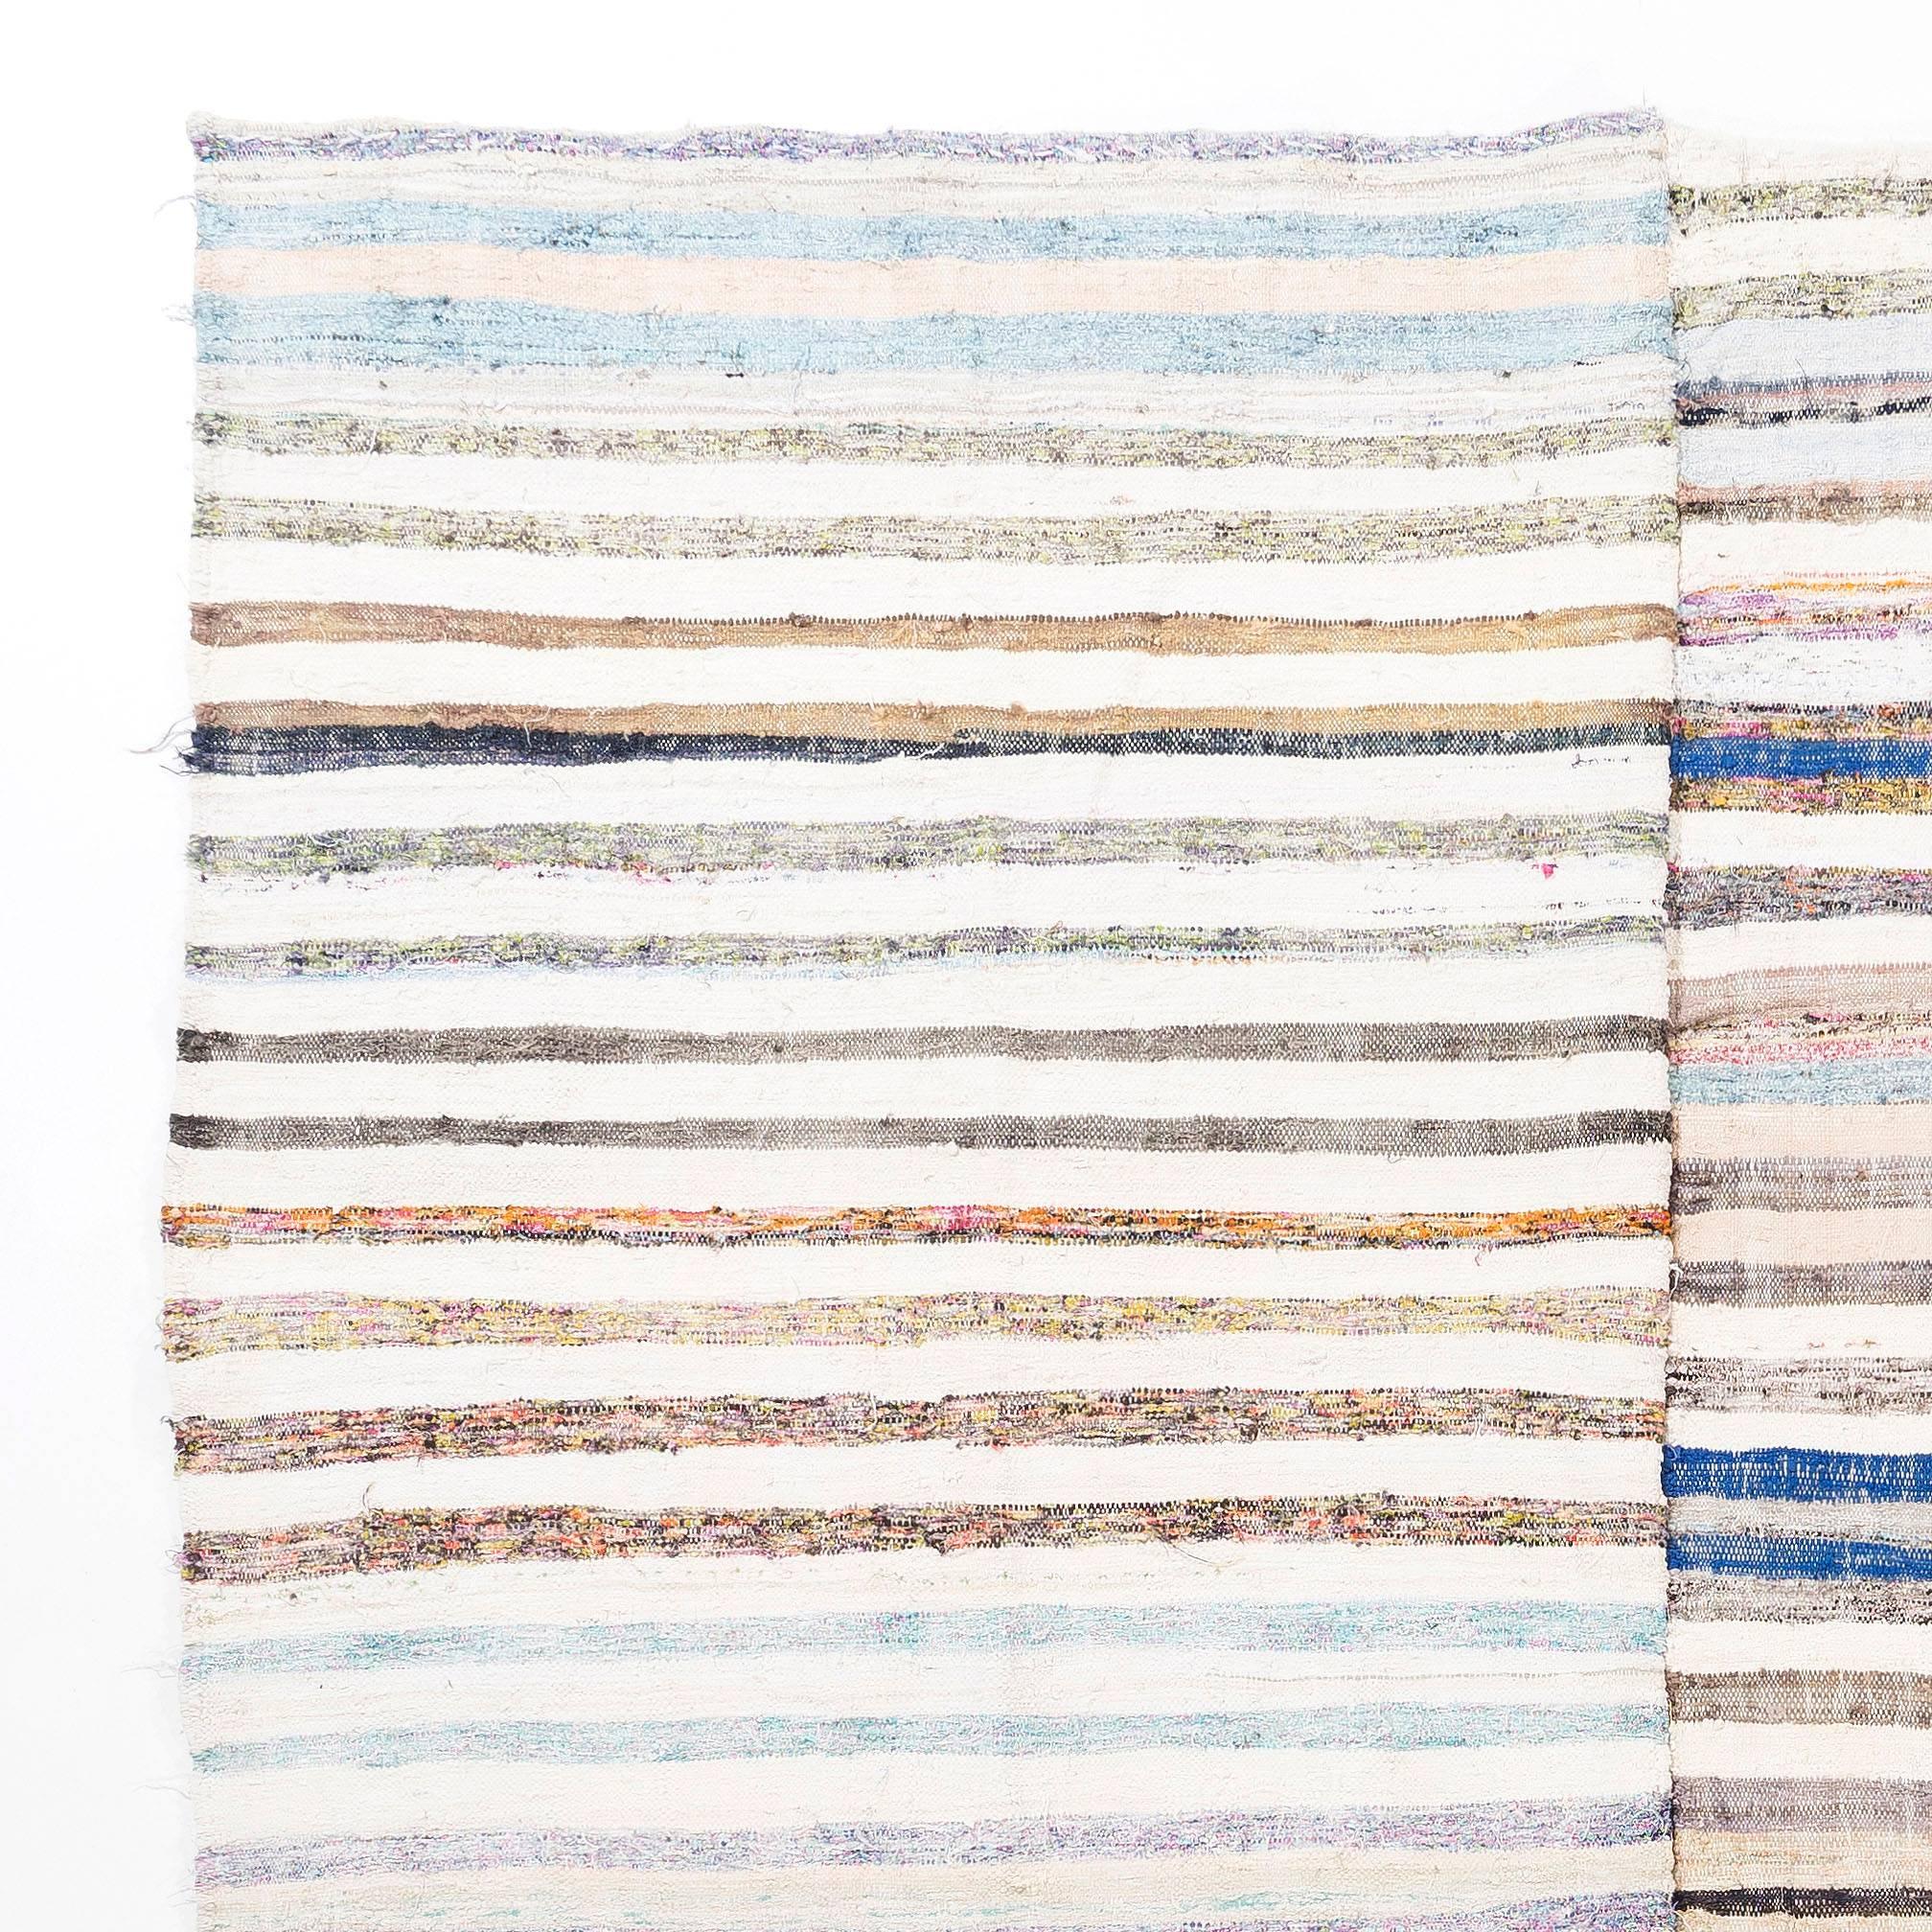 These authentic flat-weaves (Kilims) from Eastern Turkey were handwoven by Nomads, circa mid-20th century to be used as floor coverings in their tents and winter homes. They were made to use for everyday life rather than re-sale and export purposes